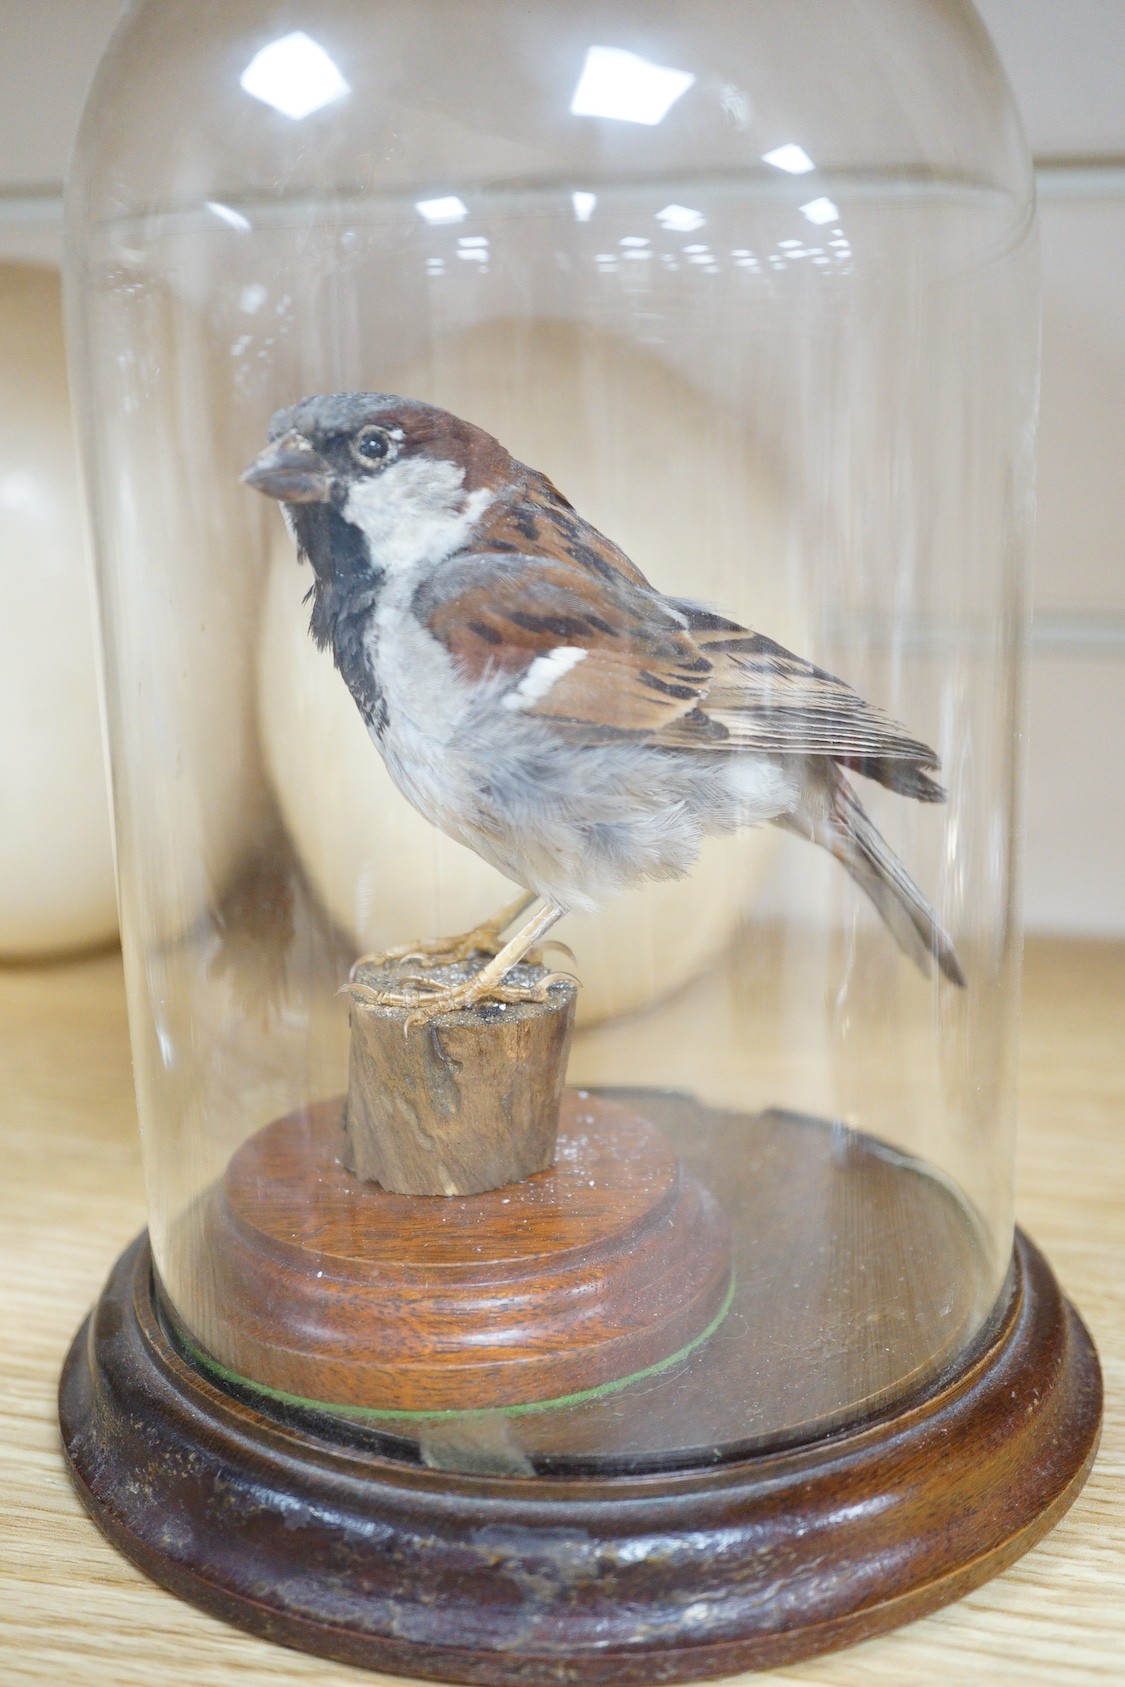 Two ostrich eggs, a taxidermy sparrow under a glass dome, 21 cm high, shell and urchin specimens